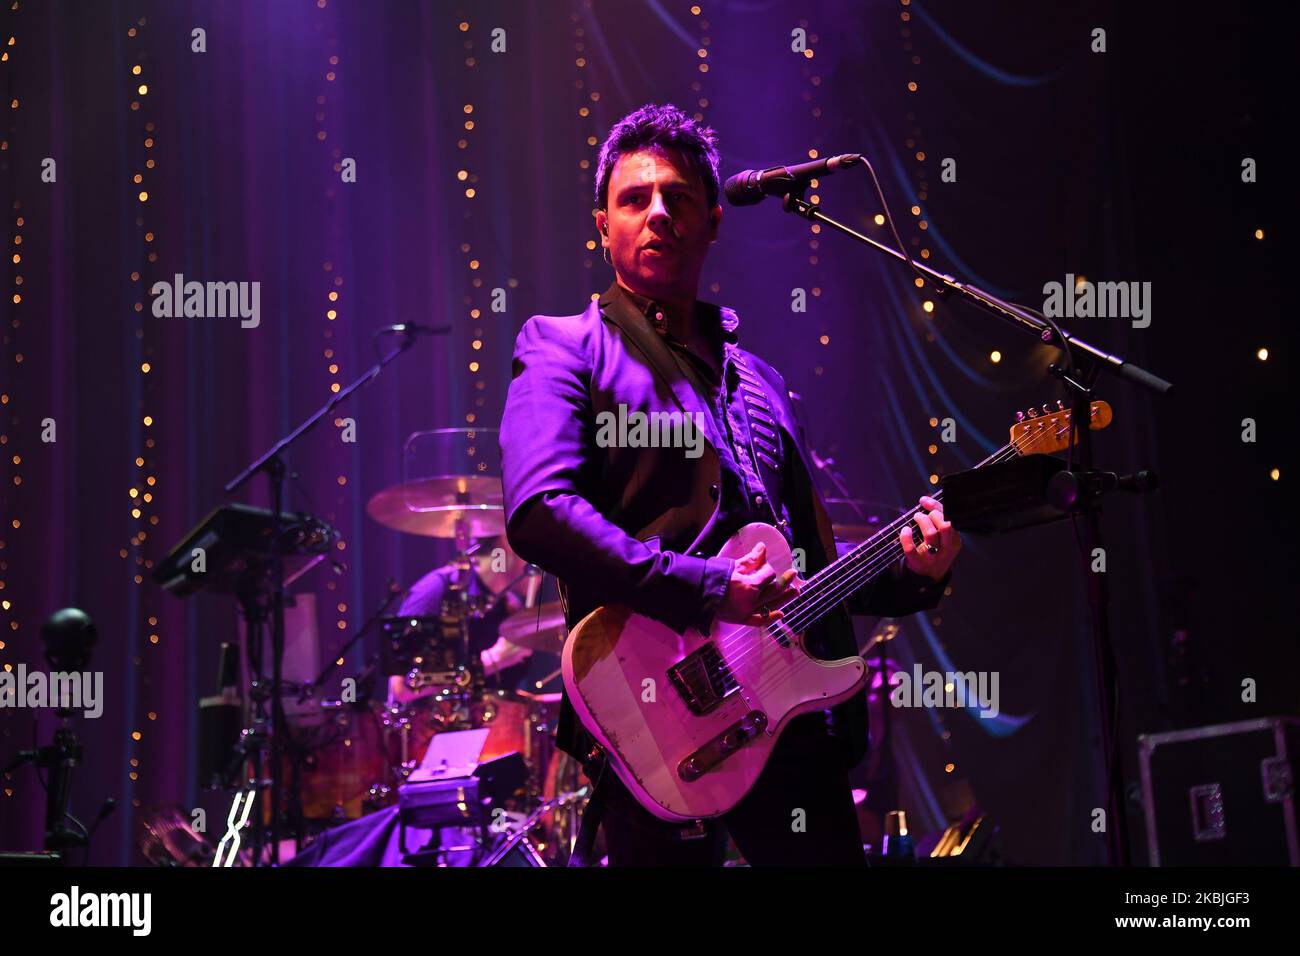 Welsh rock band Stereophonics perform on stage at the O2 Arena in London on March 6, 2020. The band consists of Kelly Jones (lead vocals, lead guitar, keyboards), Richard Jones (bass guitar, piano, backing vocals), Adam Zindani (rhythm guitar, backing vocals), Jamie Morrison (drums, percussion). (Photo by Alberto Pezzali/NurPhoto) Stock Photo